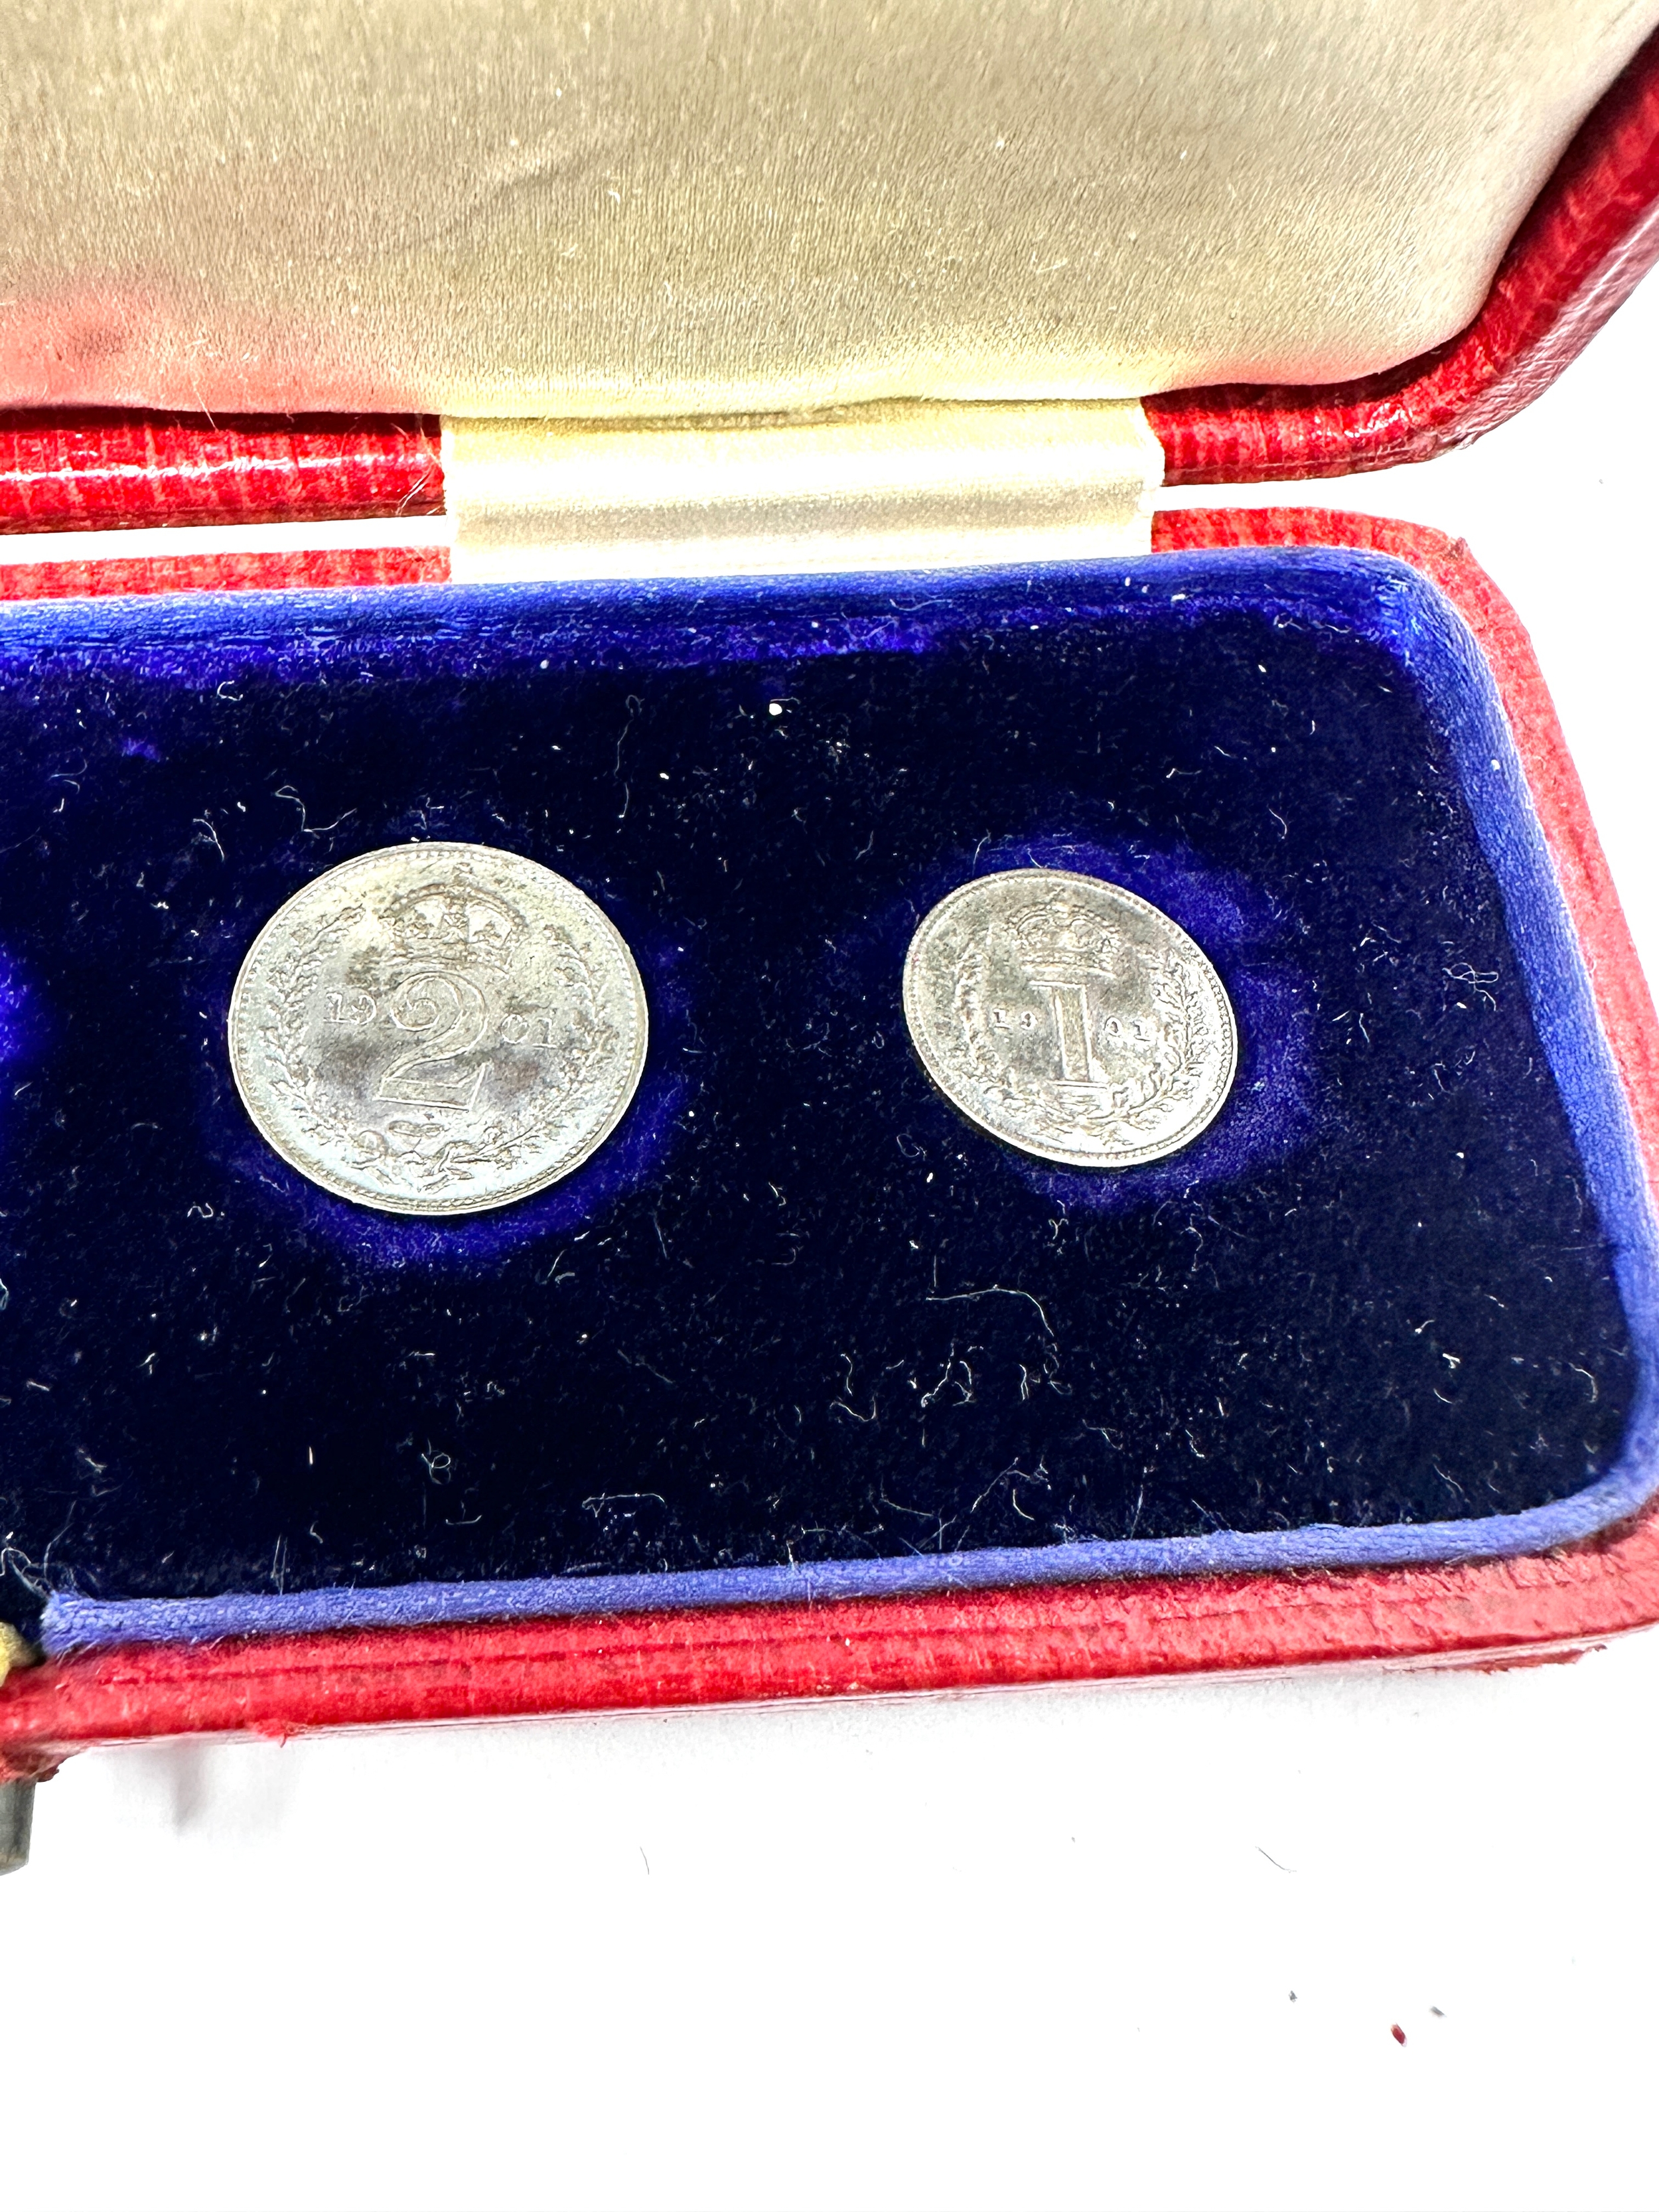 Part Queen Victoria Maundy Coin Set In Original Display Box 1901 UNC Condition missing 3 pence coin - Bild 3 aus 5